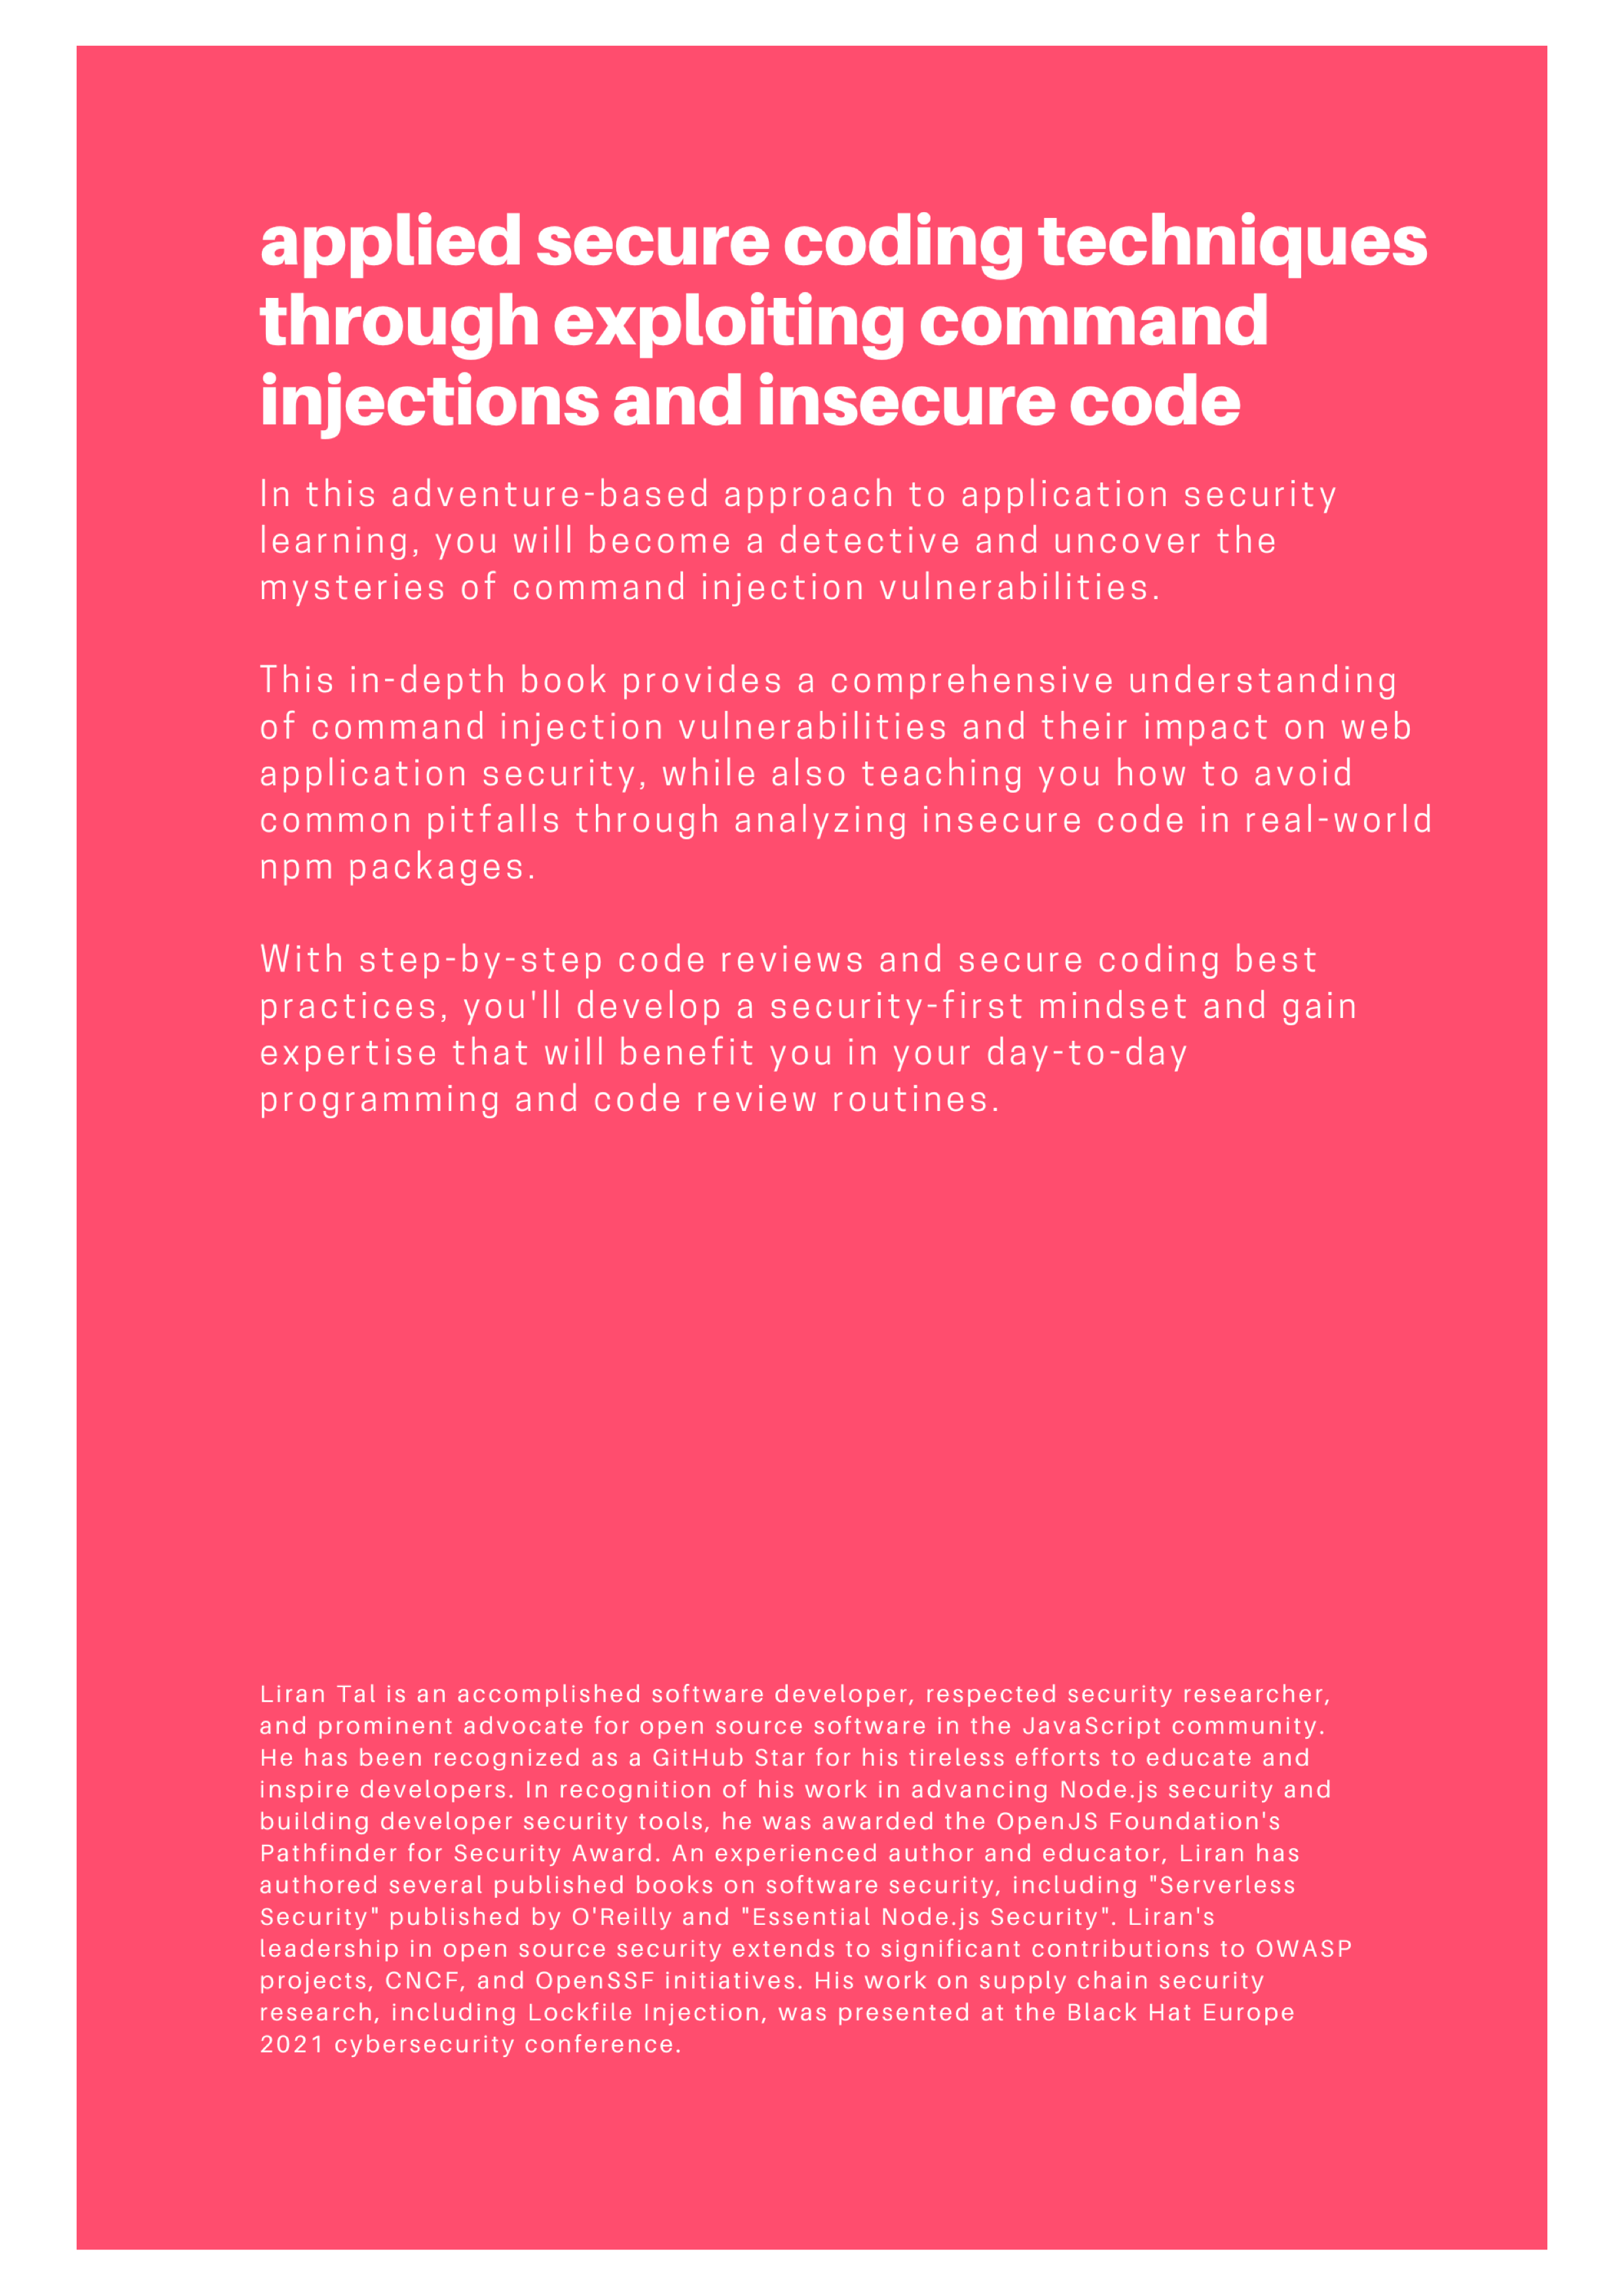 The command injection book back cover